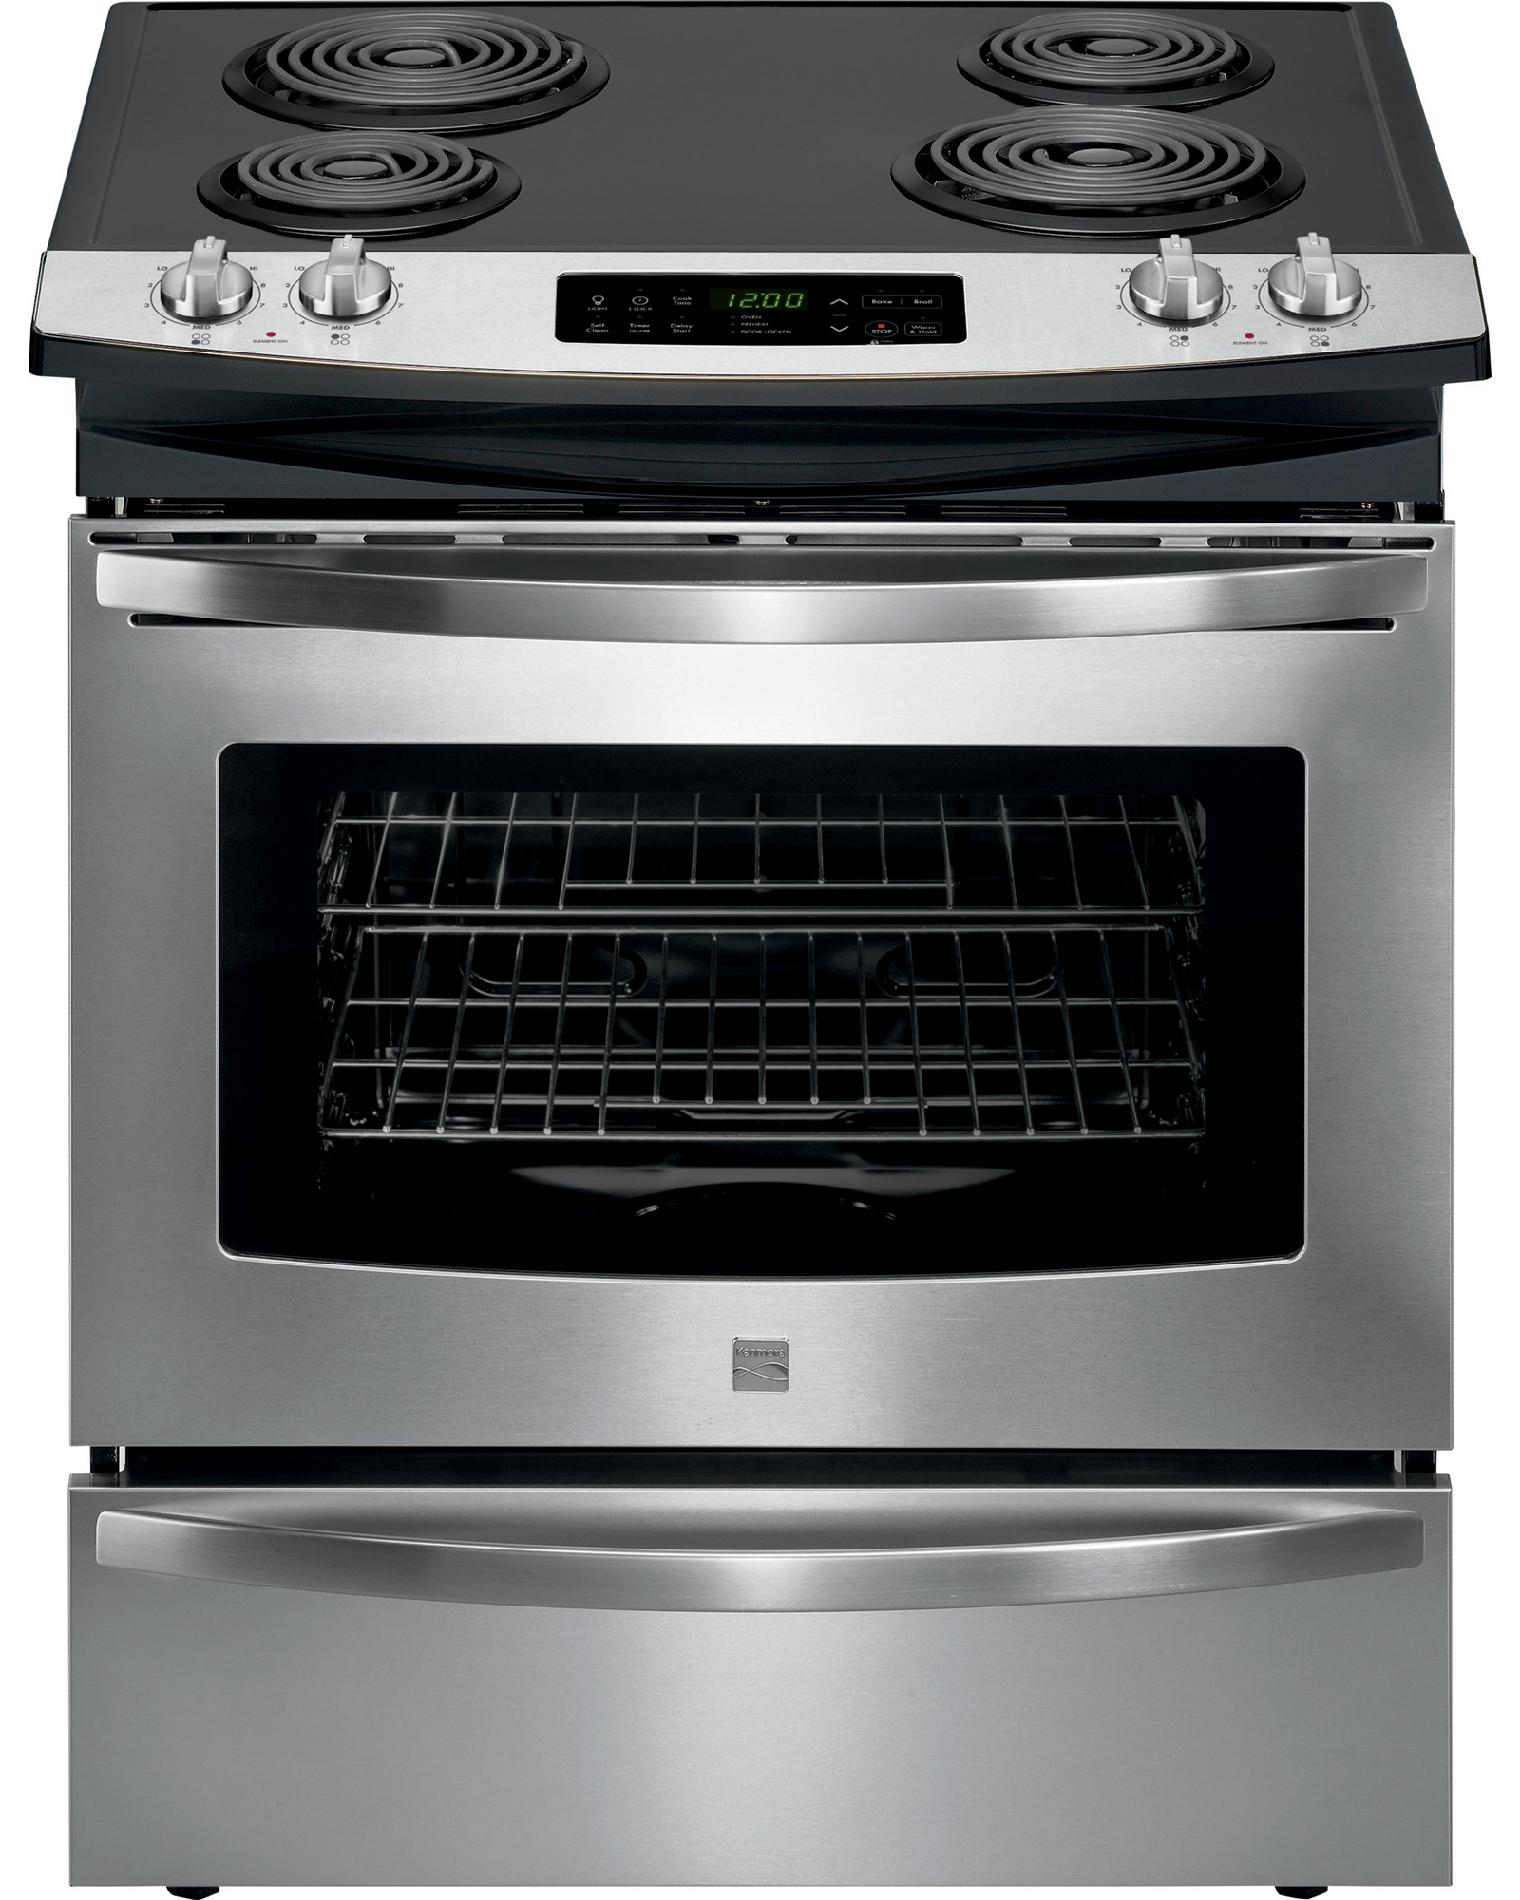 0012505801044 - 42523 4.6 CU. FT. SELF-CLEAN SLIDE-IN ELECTRIC RANGE W/ DELUXE COIL ELEMENTS - STAINLESS STEEL